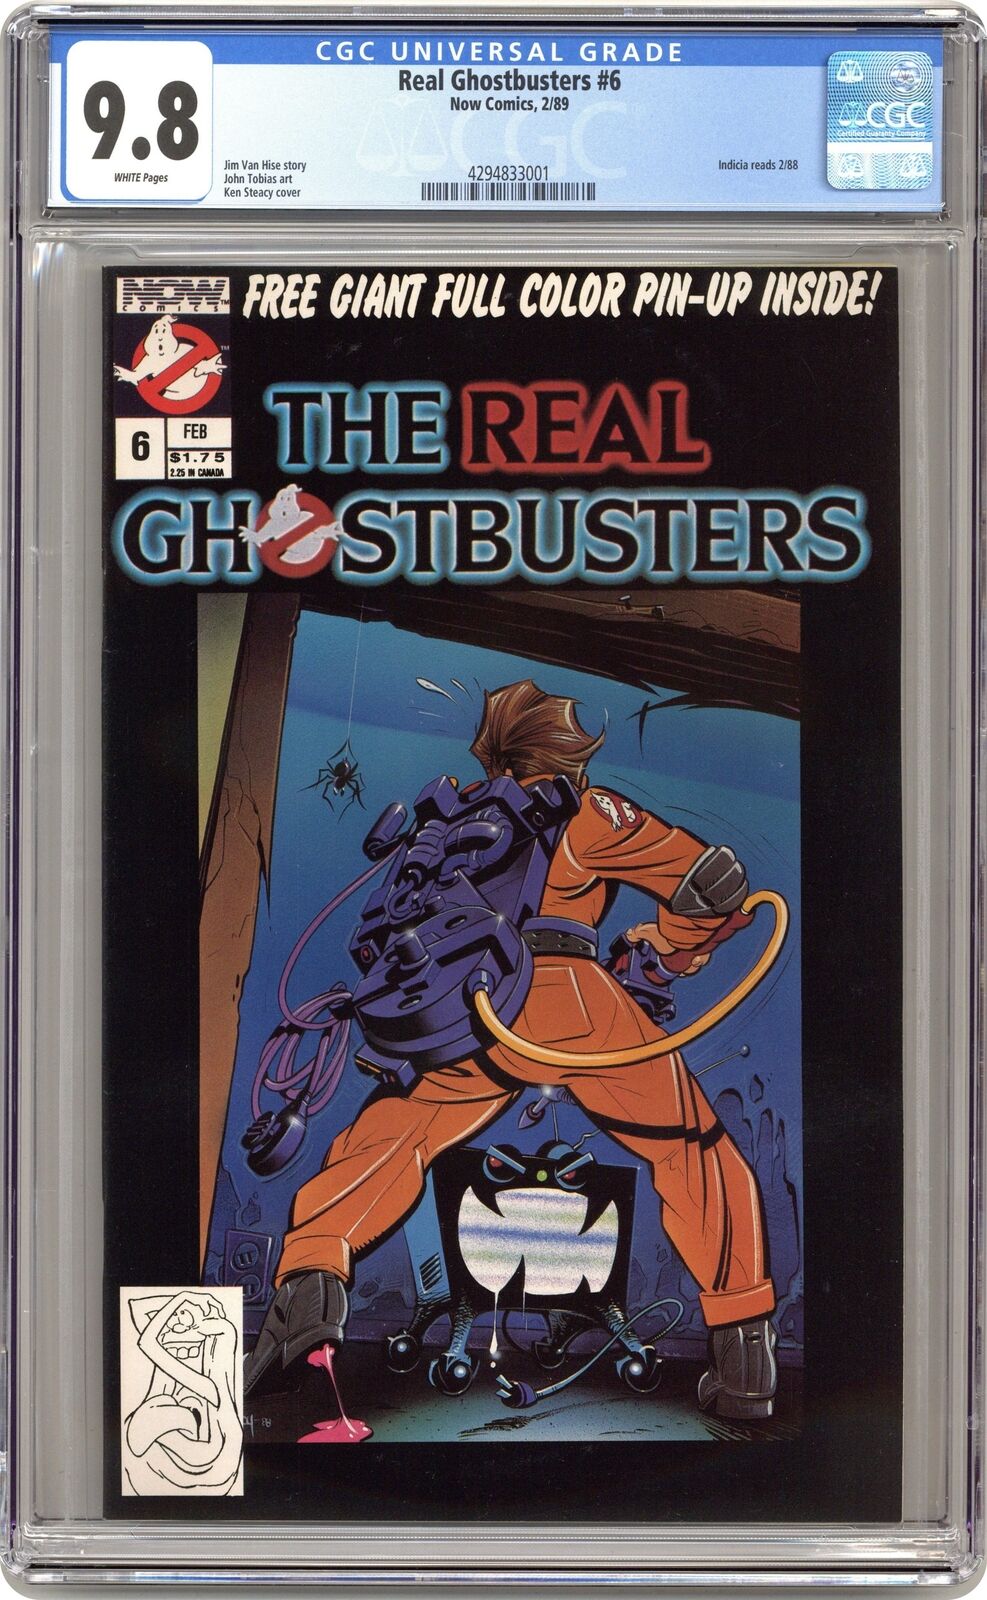 Real Ghostbusters #6 CGC 9.8 1989 4294833001